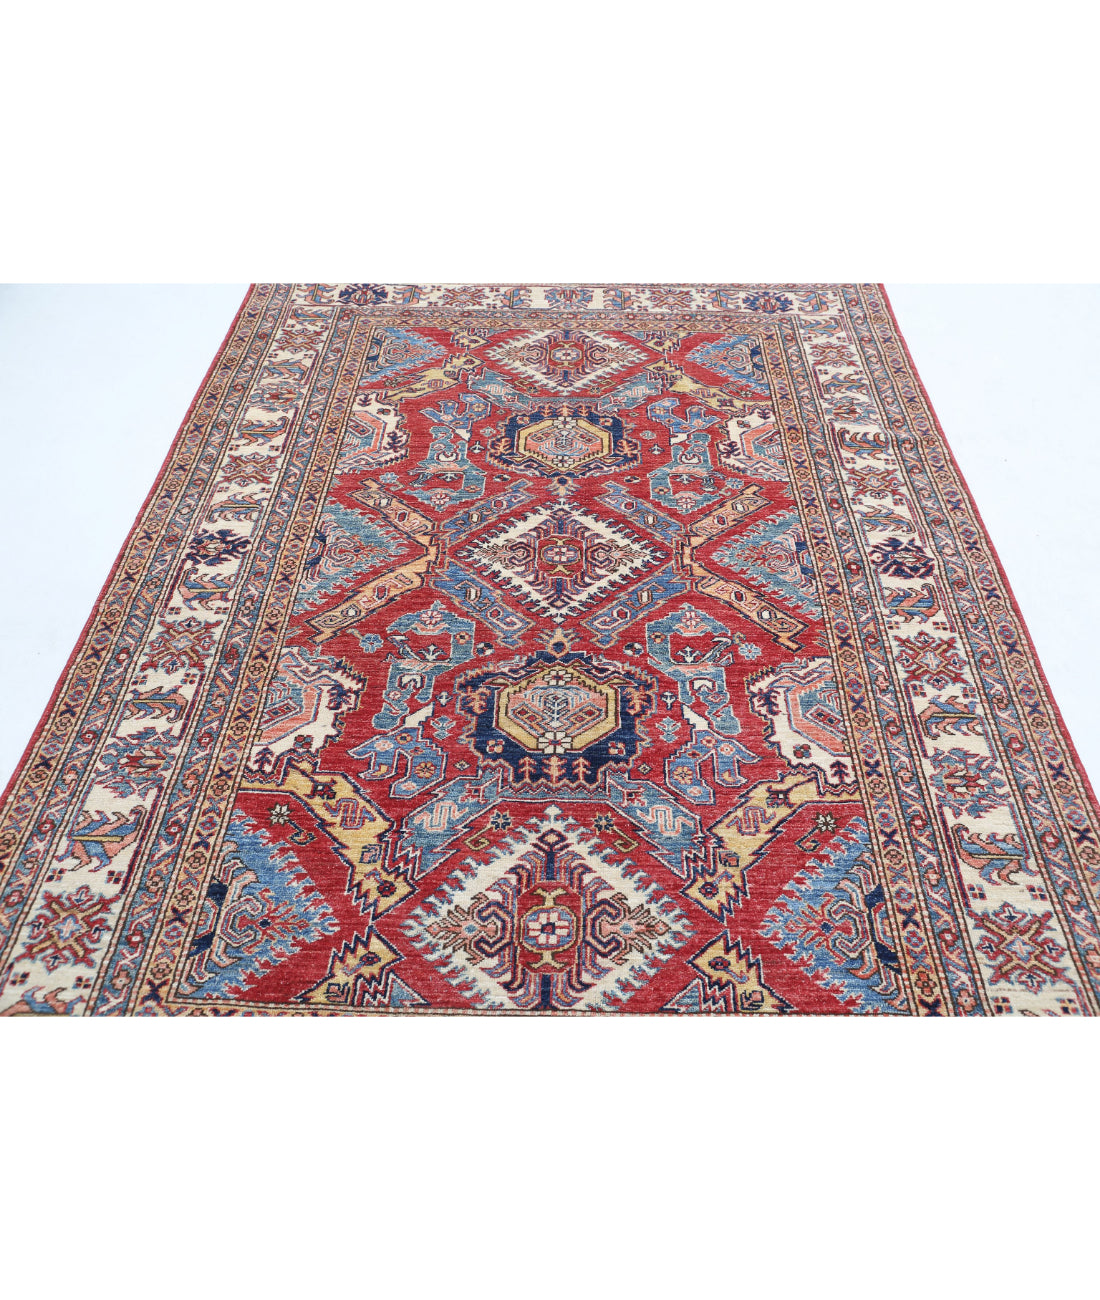 Hand Knotted Royal Kazak Wool Rug - 5'9'' x 7'11'' 5'9'' x 7'11'' (173 X 238) / Red / Ivory